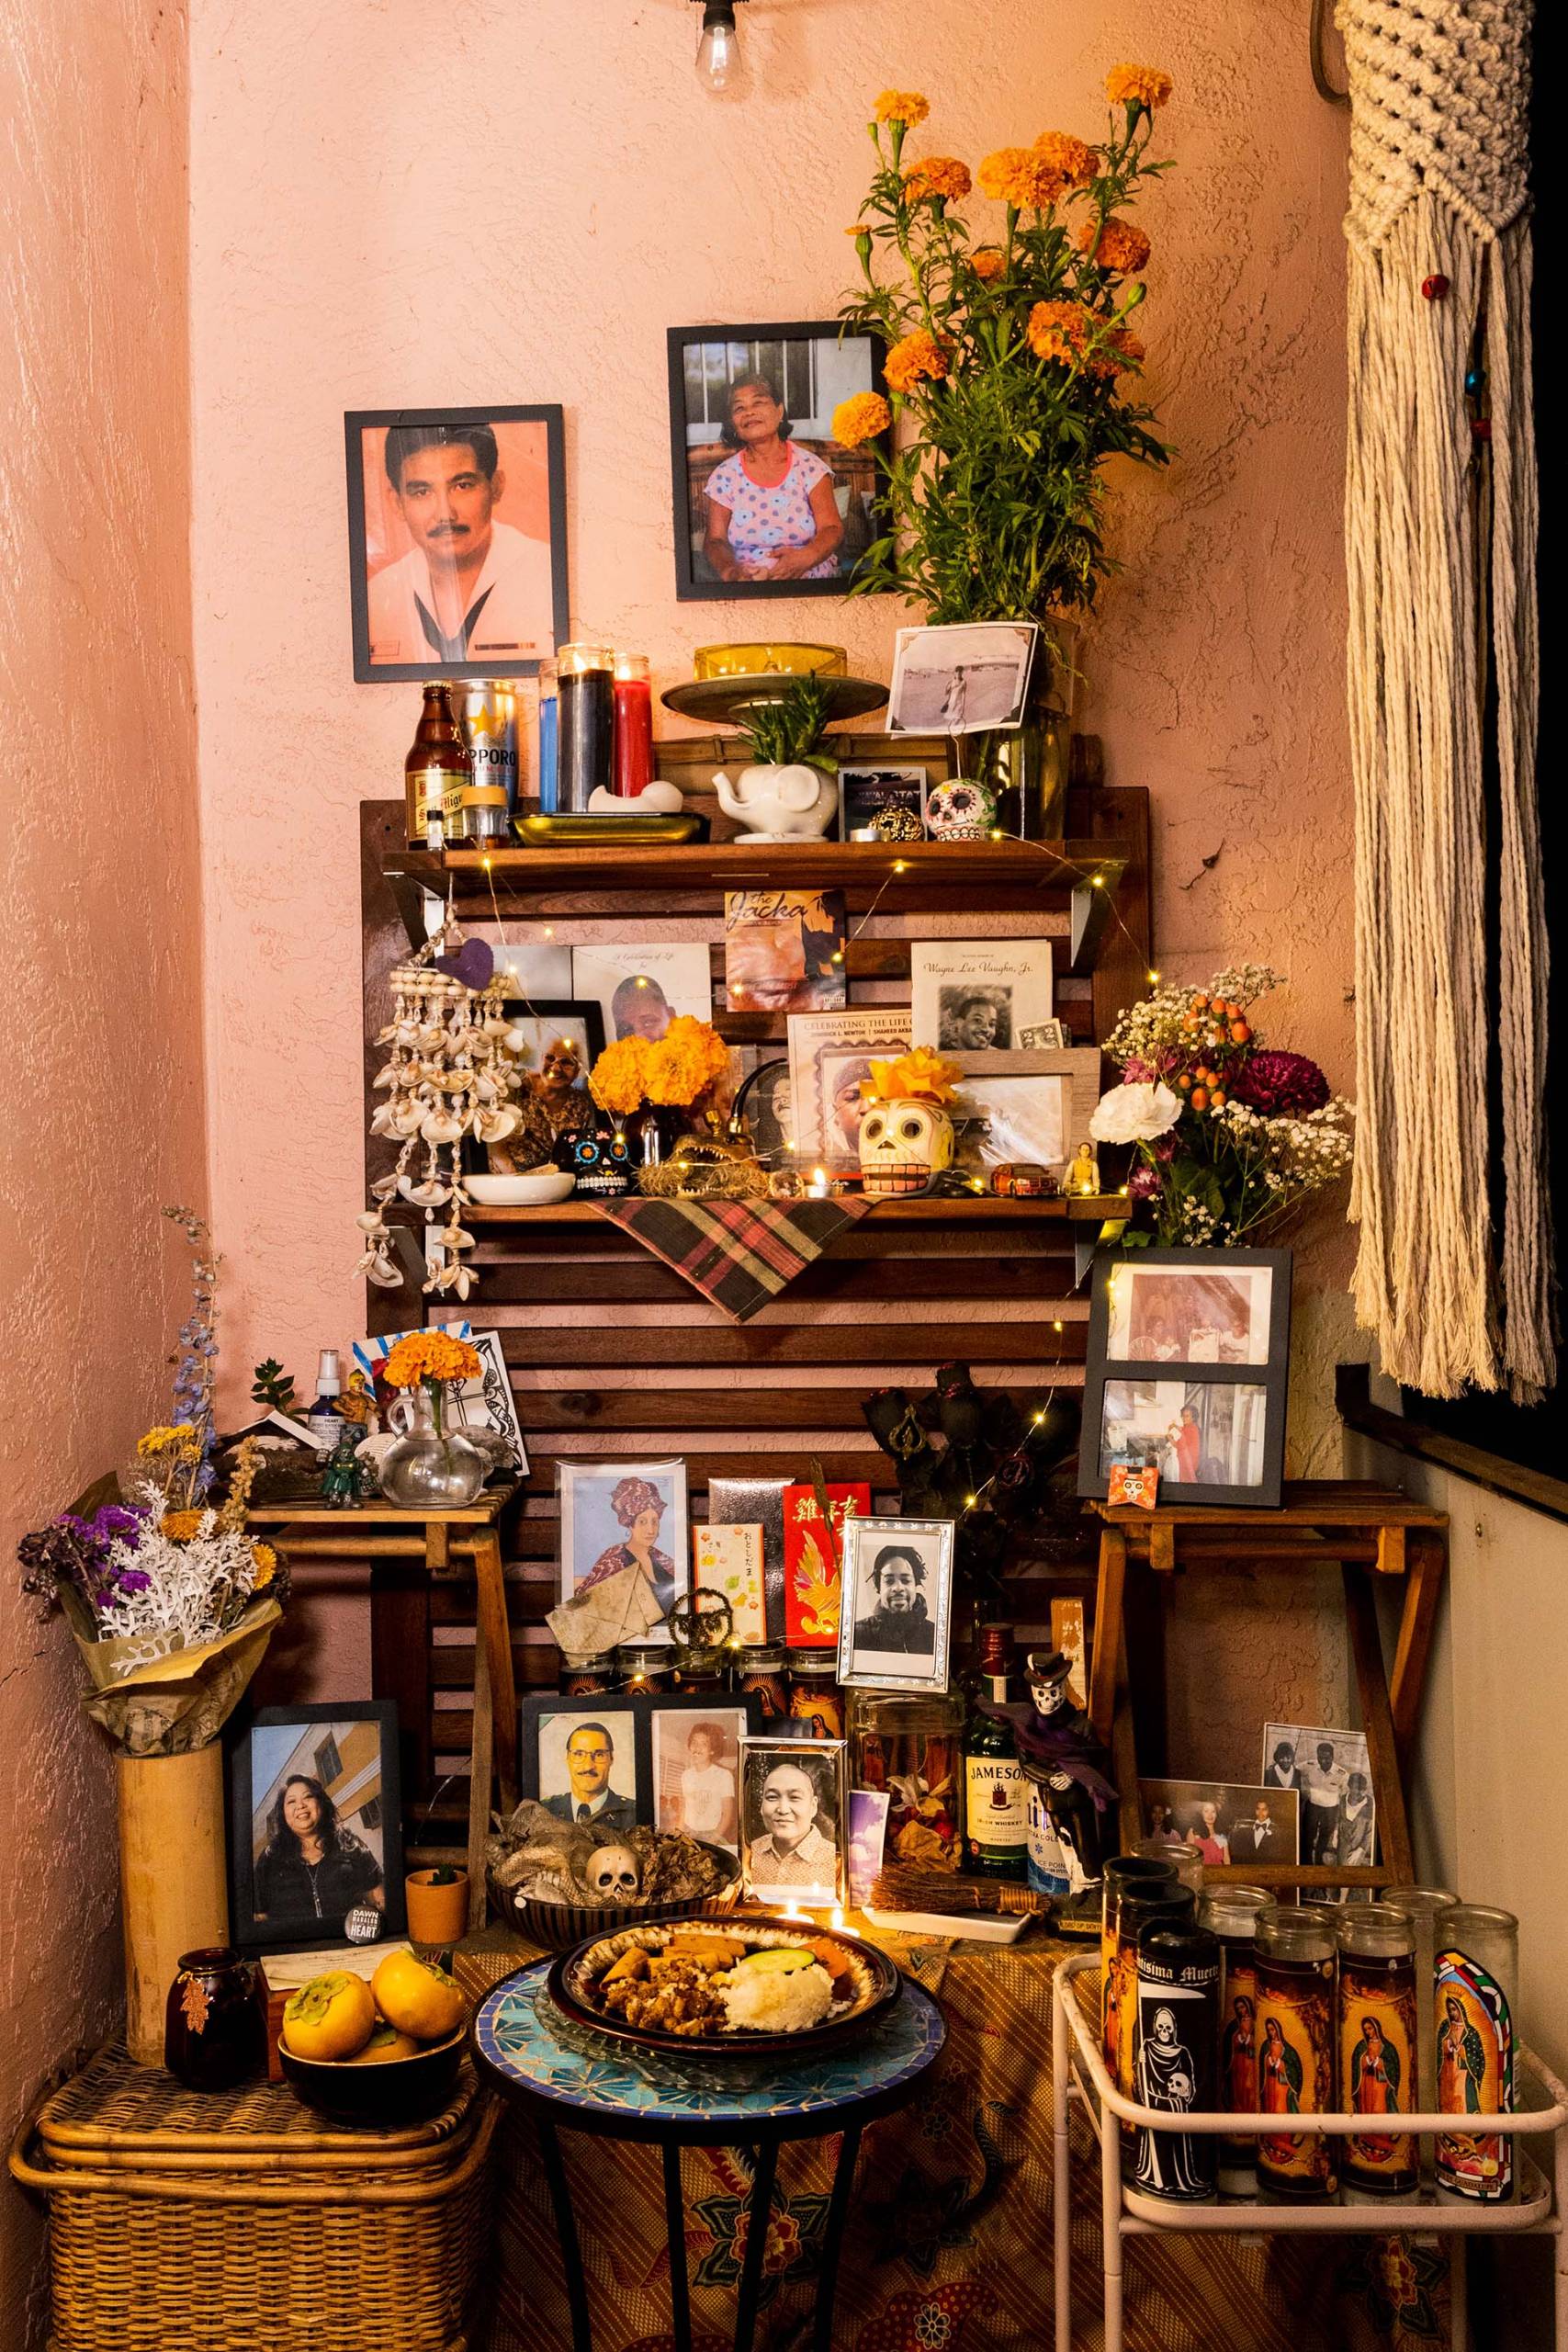 A home altar for honoring the ancestors, covered with framed photos, decorative skulls and food offerings.